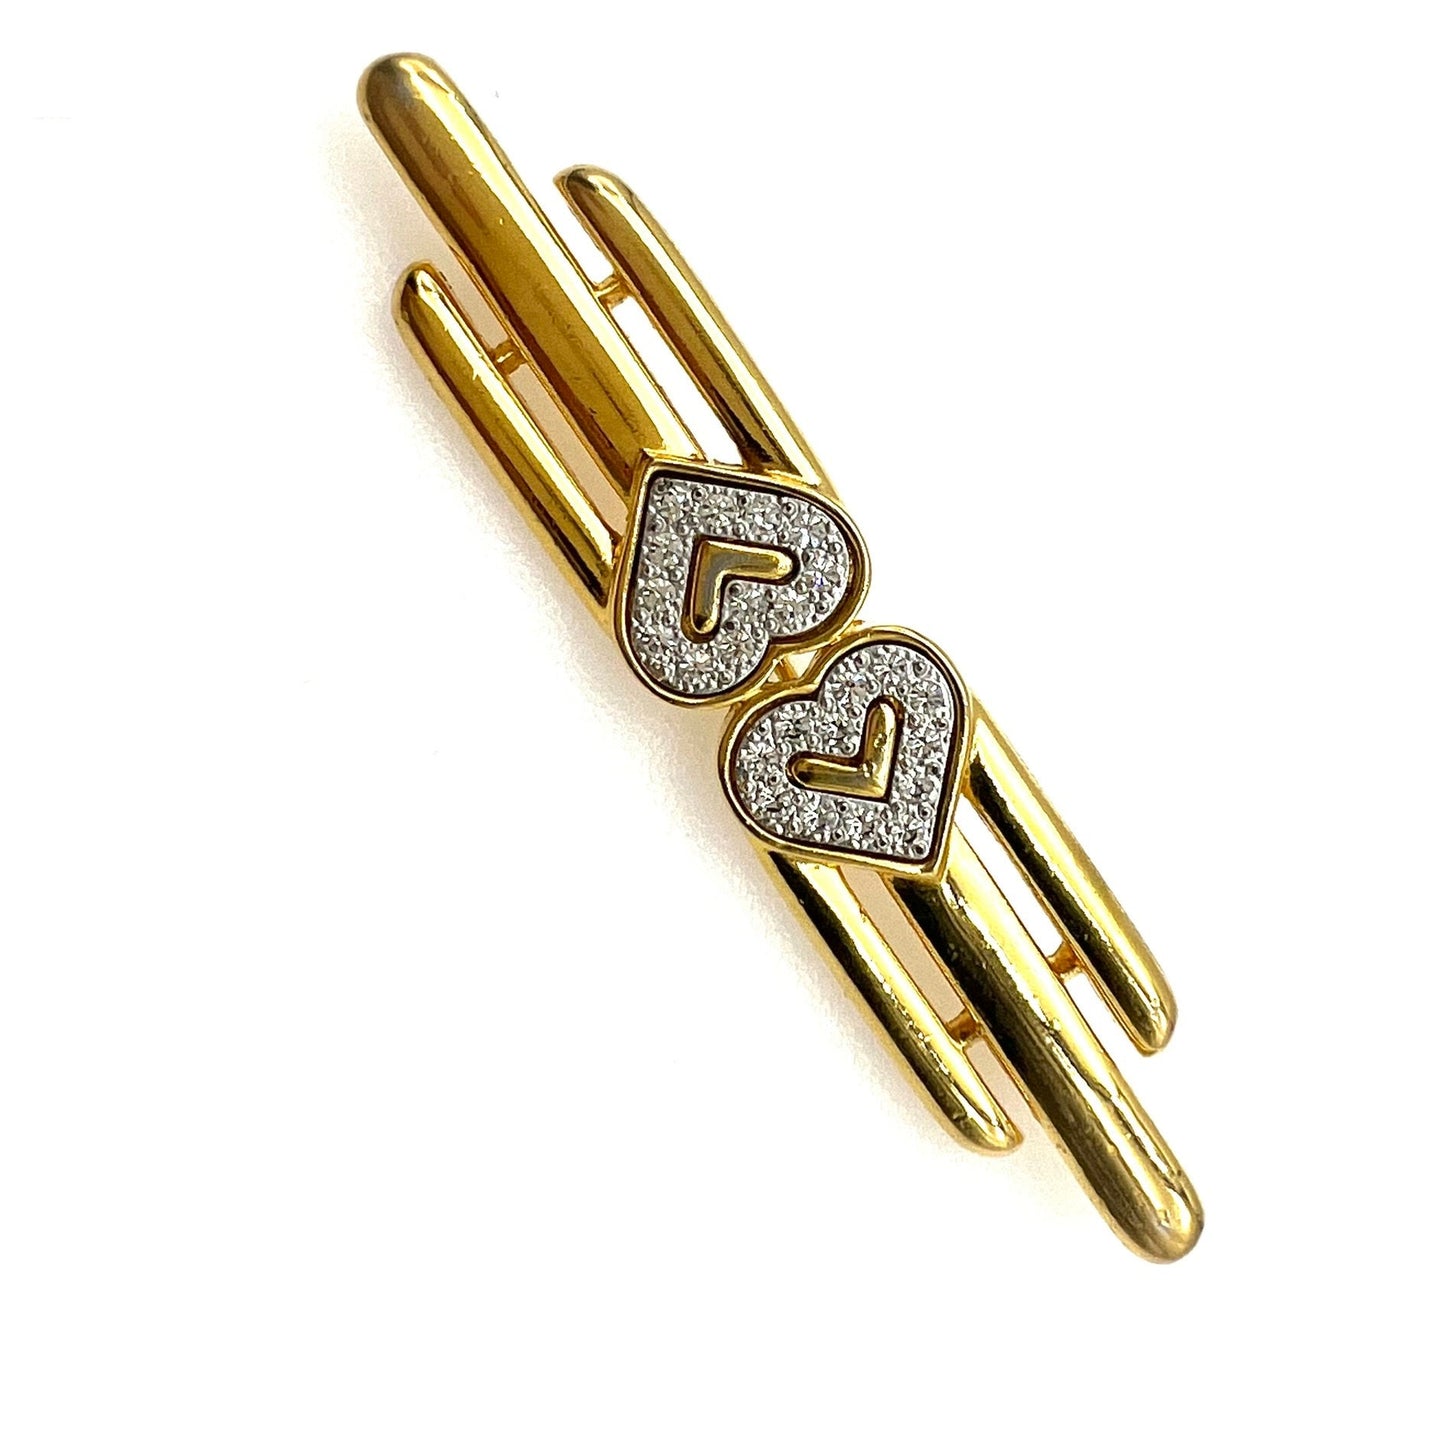 Monet Gold Plated Crystal Double Heart Brooch